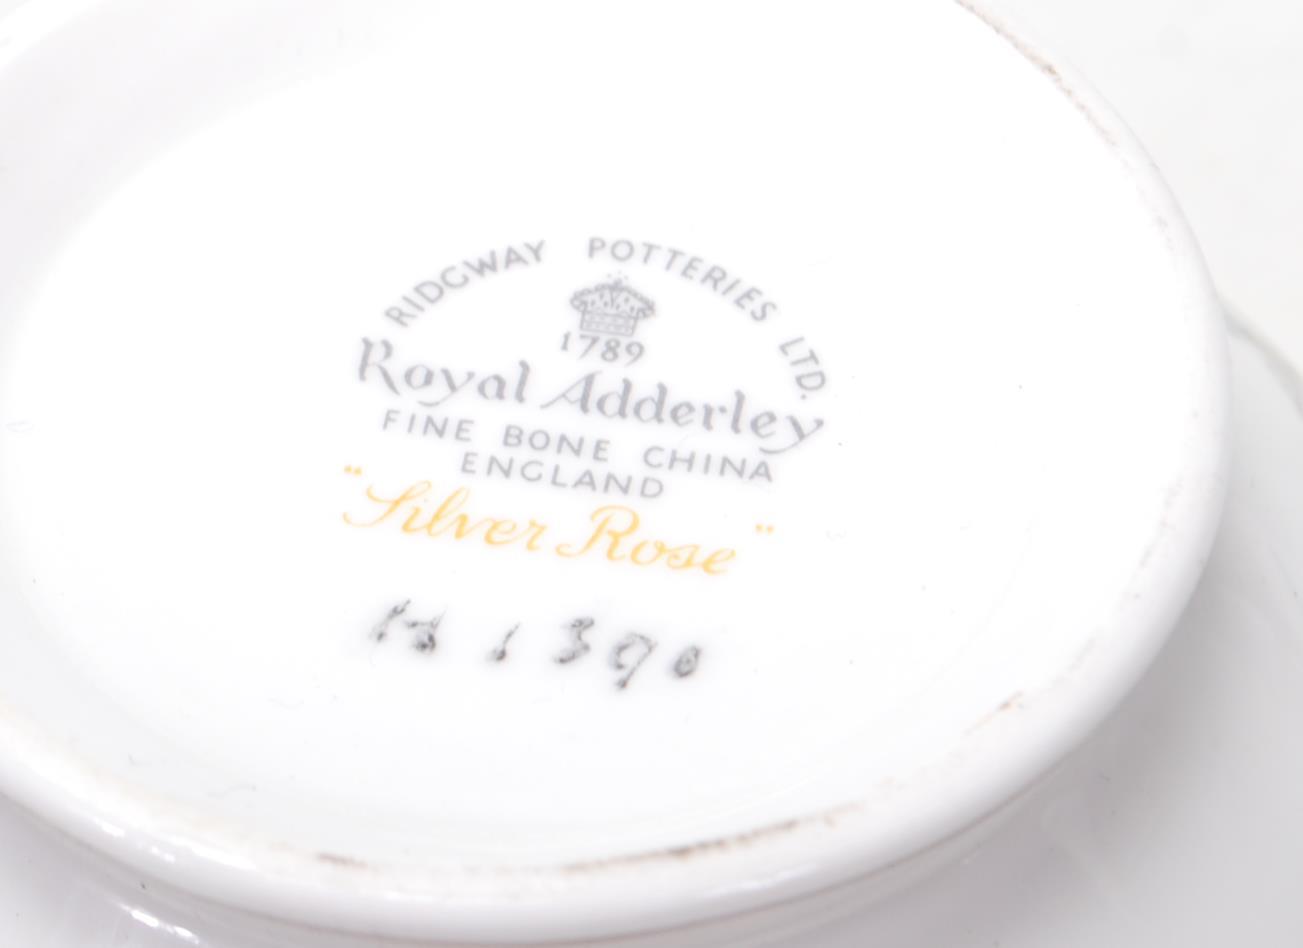 ROYAL ADDERLEY SILVER ROSE TEA SERVICE FOR SIX - Image 7 of 7